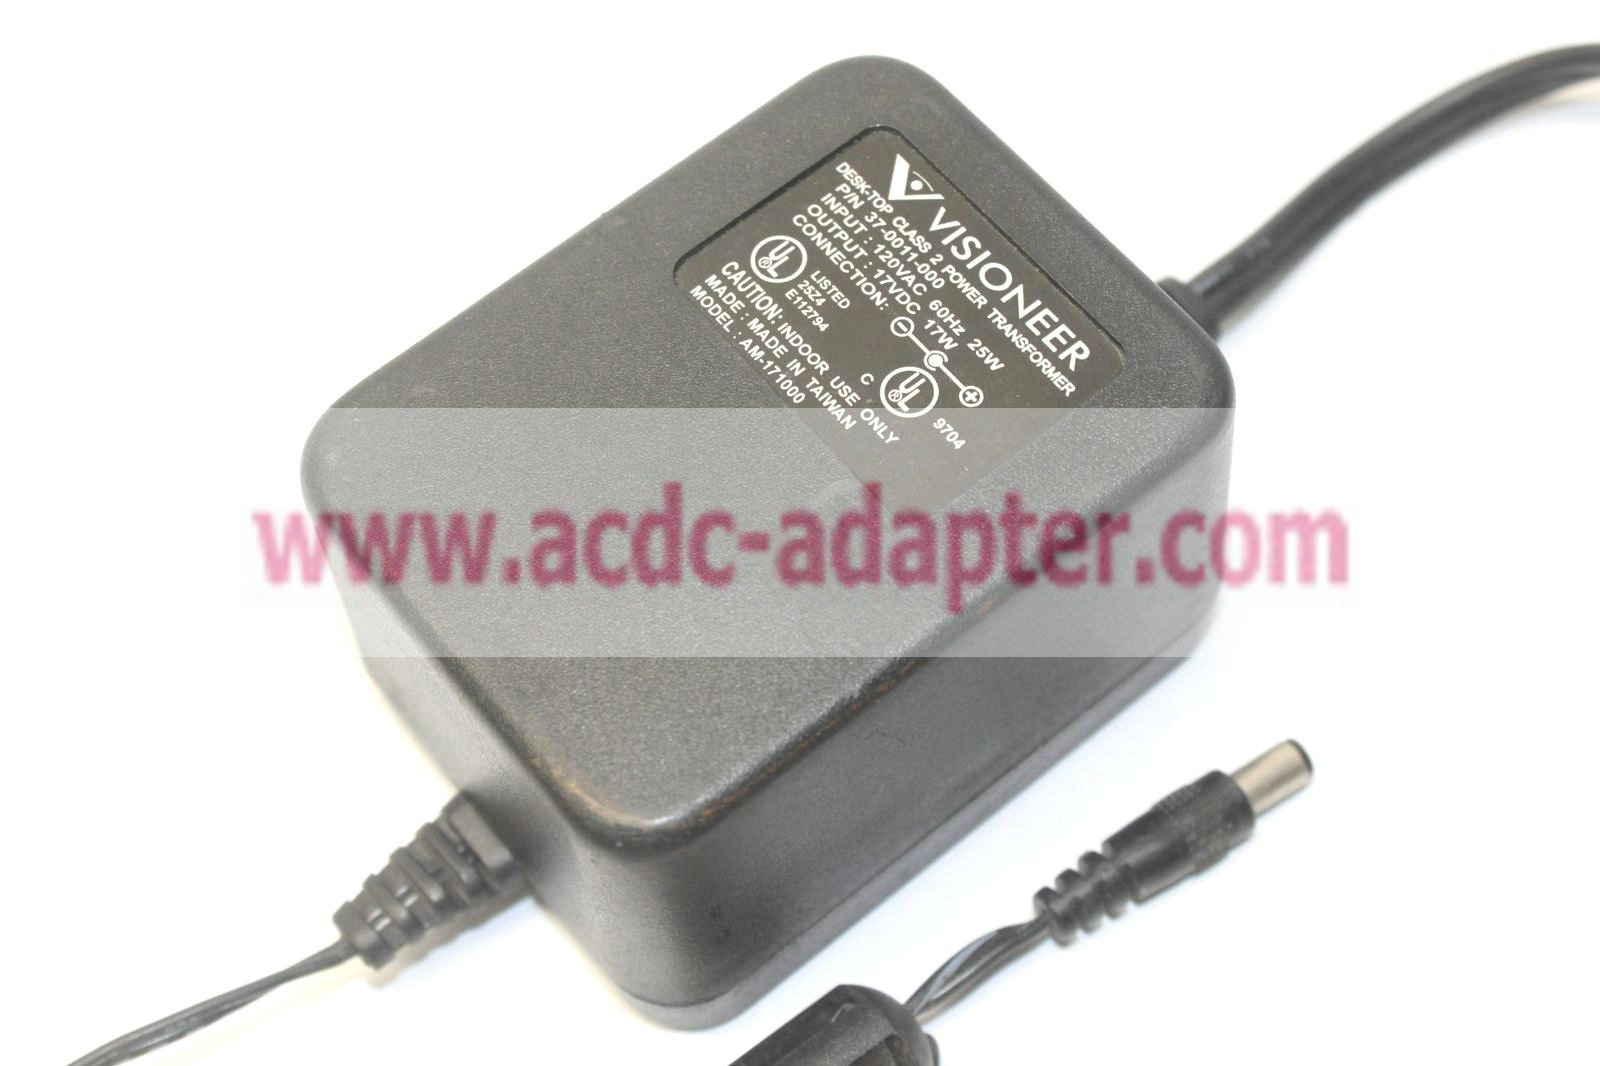 New Visioneer AM-171000 37-0011-000 Class 2 Transformer Power Supply AC Adapter - Click Image to Close